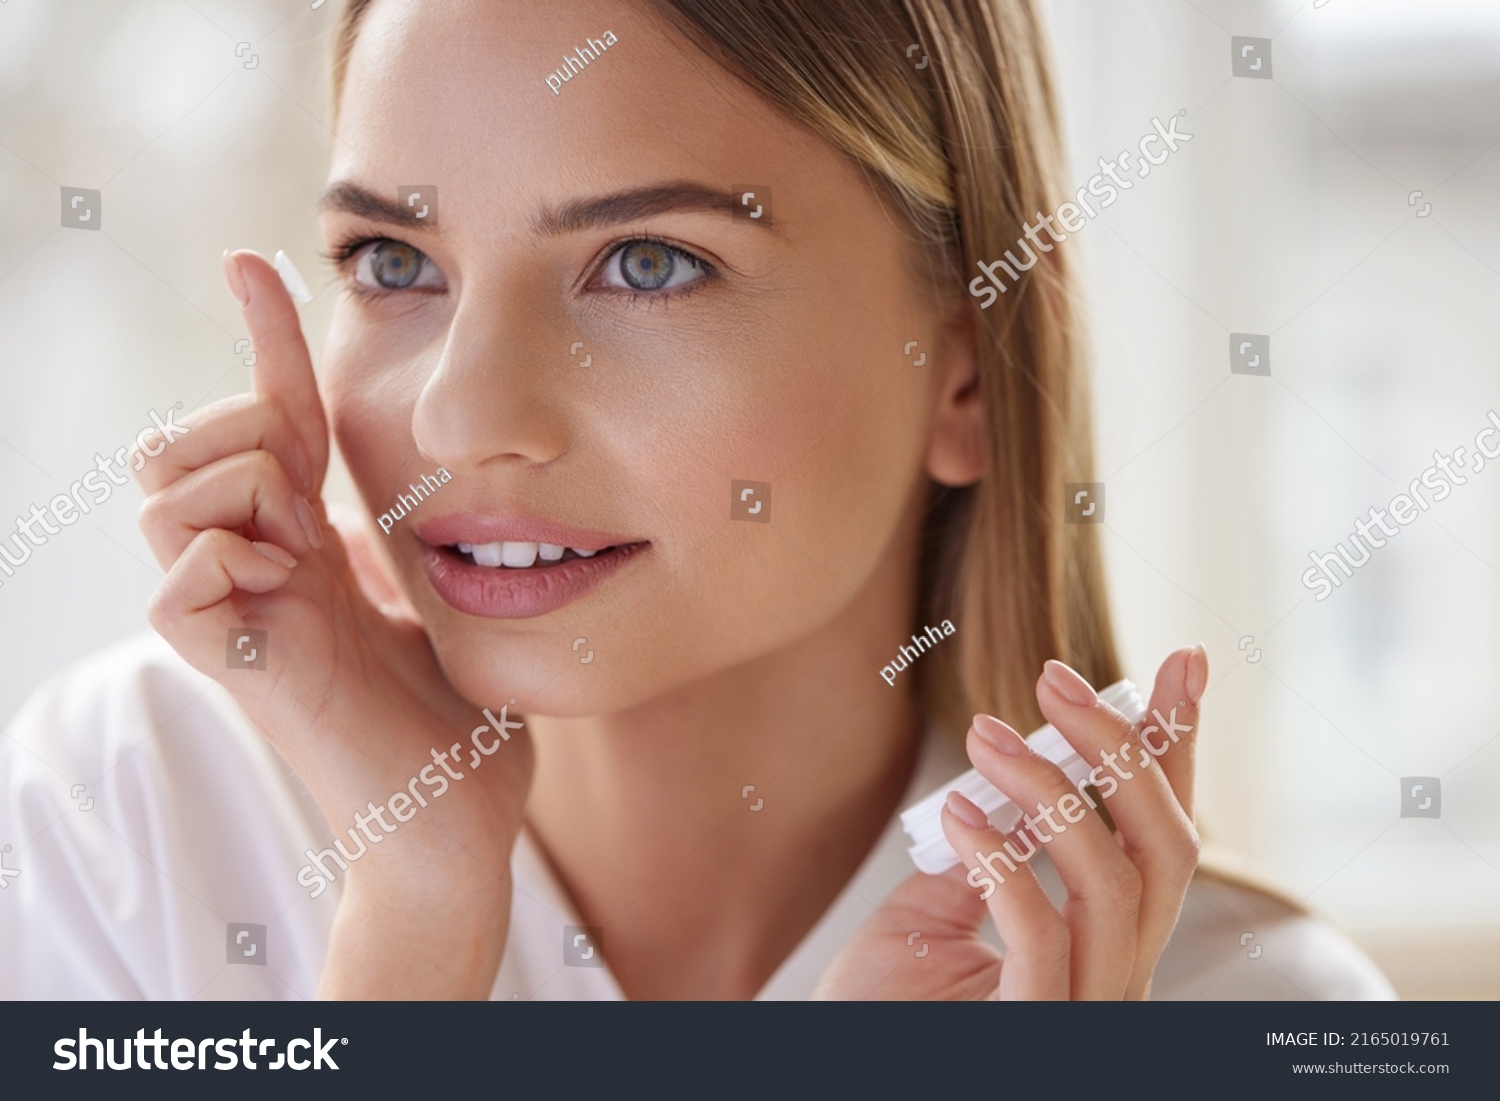 Eye care. Smiling Woman With Contact Eye Lens on Finger Closeup. Portrait of Beautiful Blonde Girl Putting Contacts Lenses in Eyes. Vision Health Concept  #2165019761